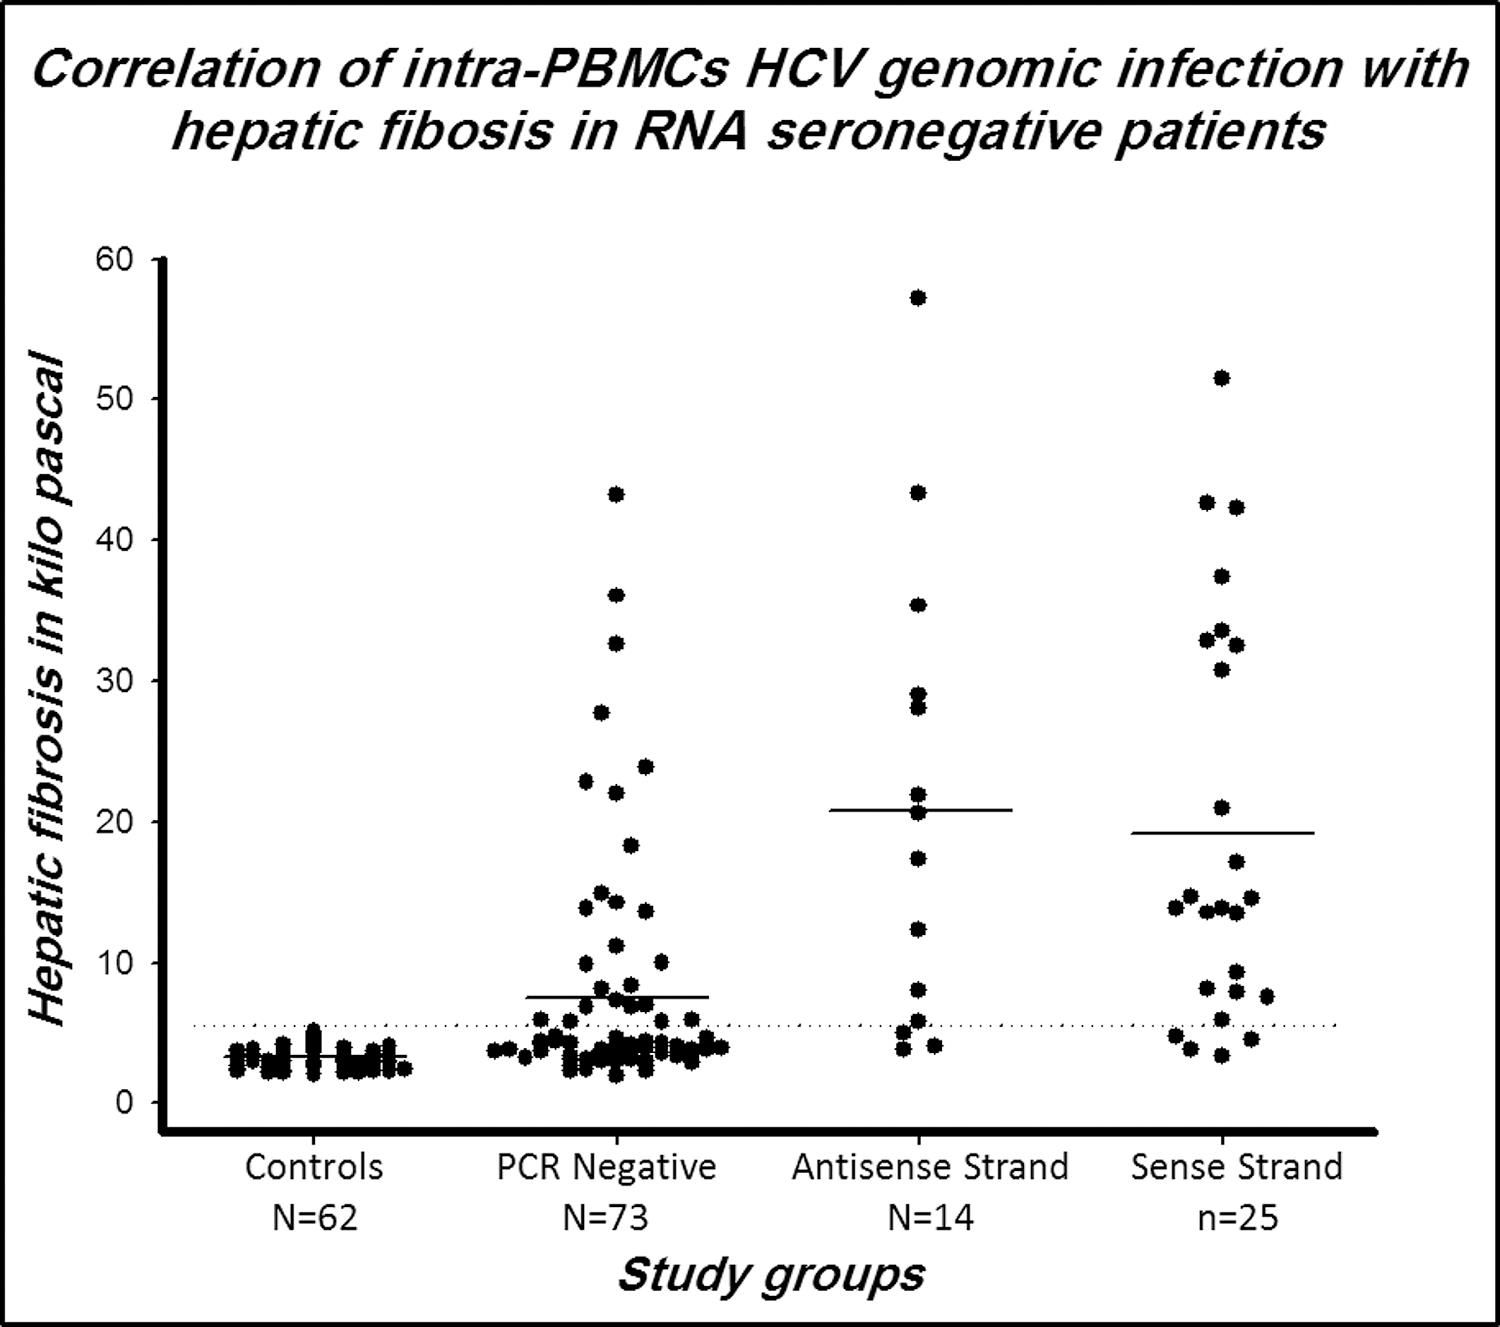 Relative quantification of hepatic fibrosis per RNA seronegative subject in relation to intra-PBMC HCV-infection.